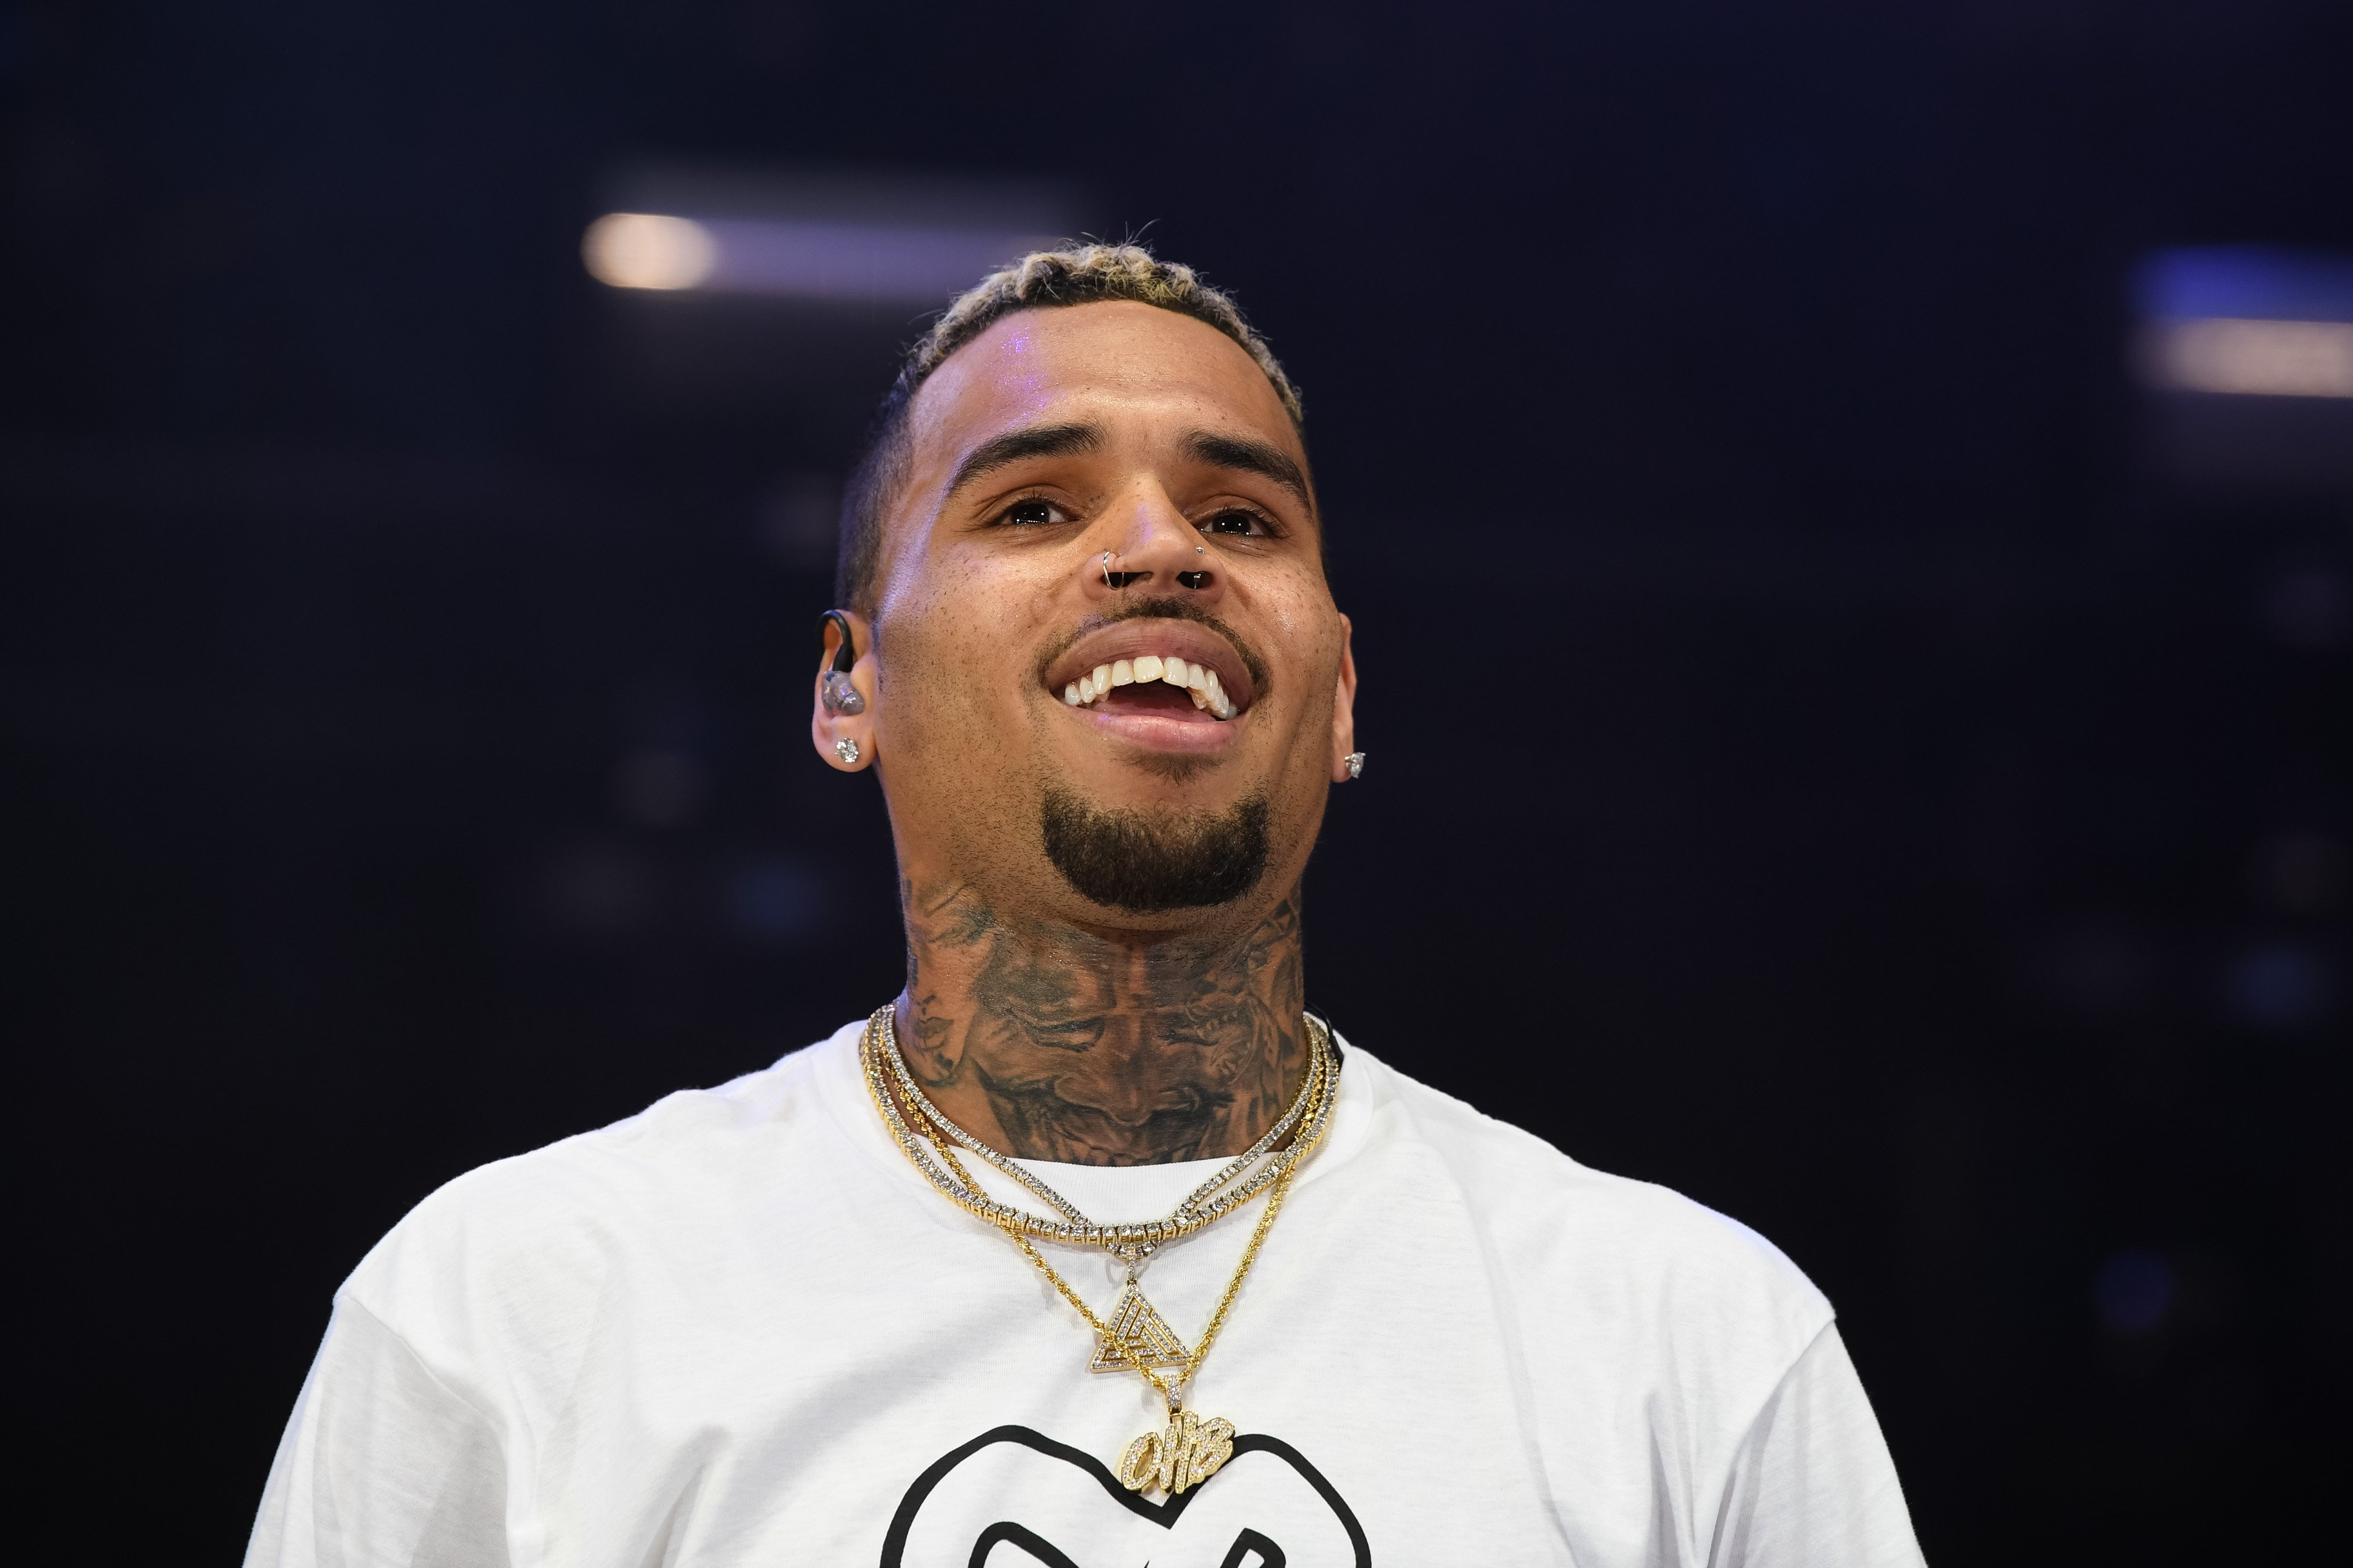 Chris Brown pictured on stage at the HOT 97 Summer Jam 2017 on June 11, 2017 in East Rutherford, New Jersey. | Source: Getty Images